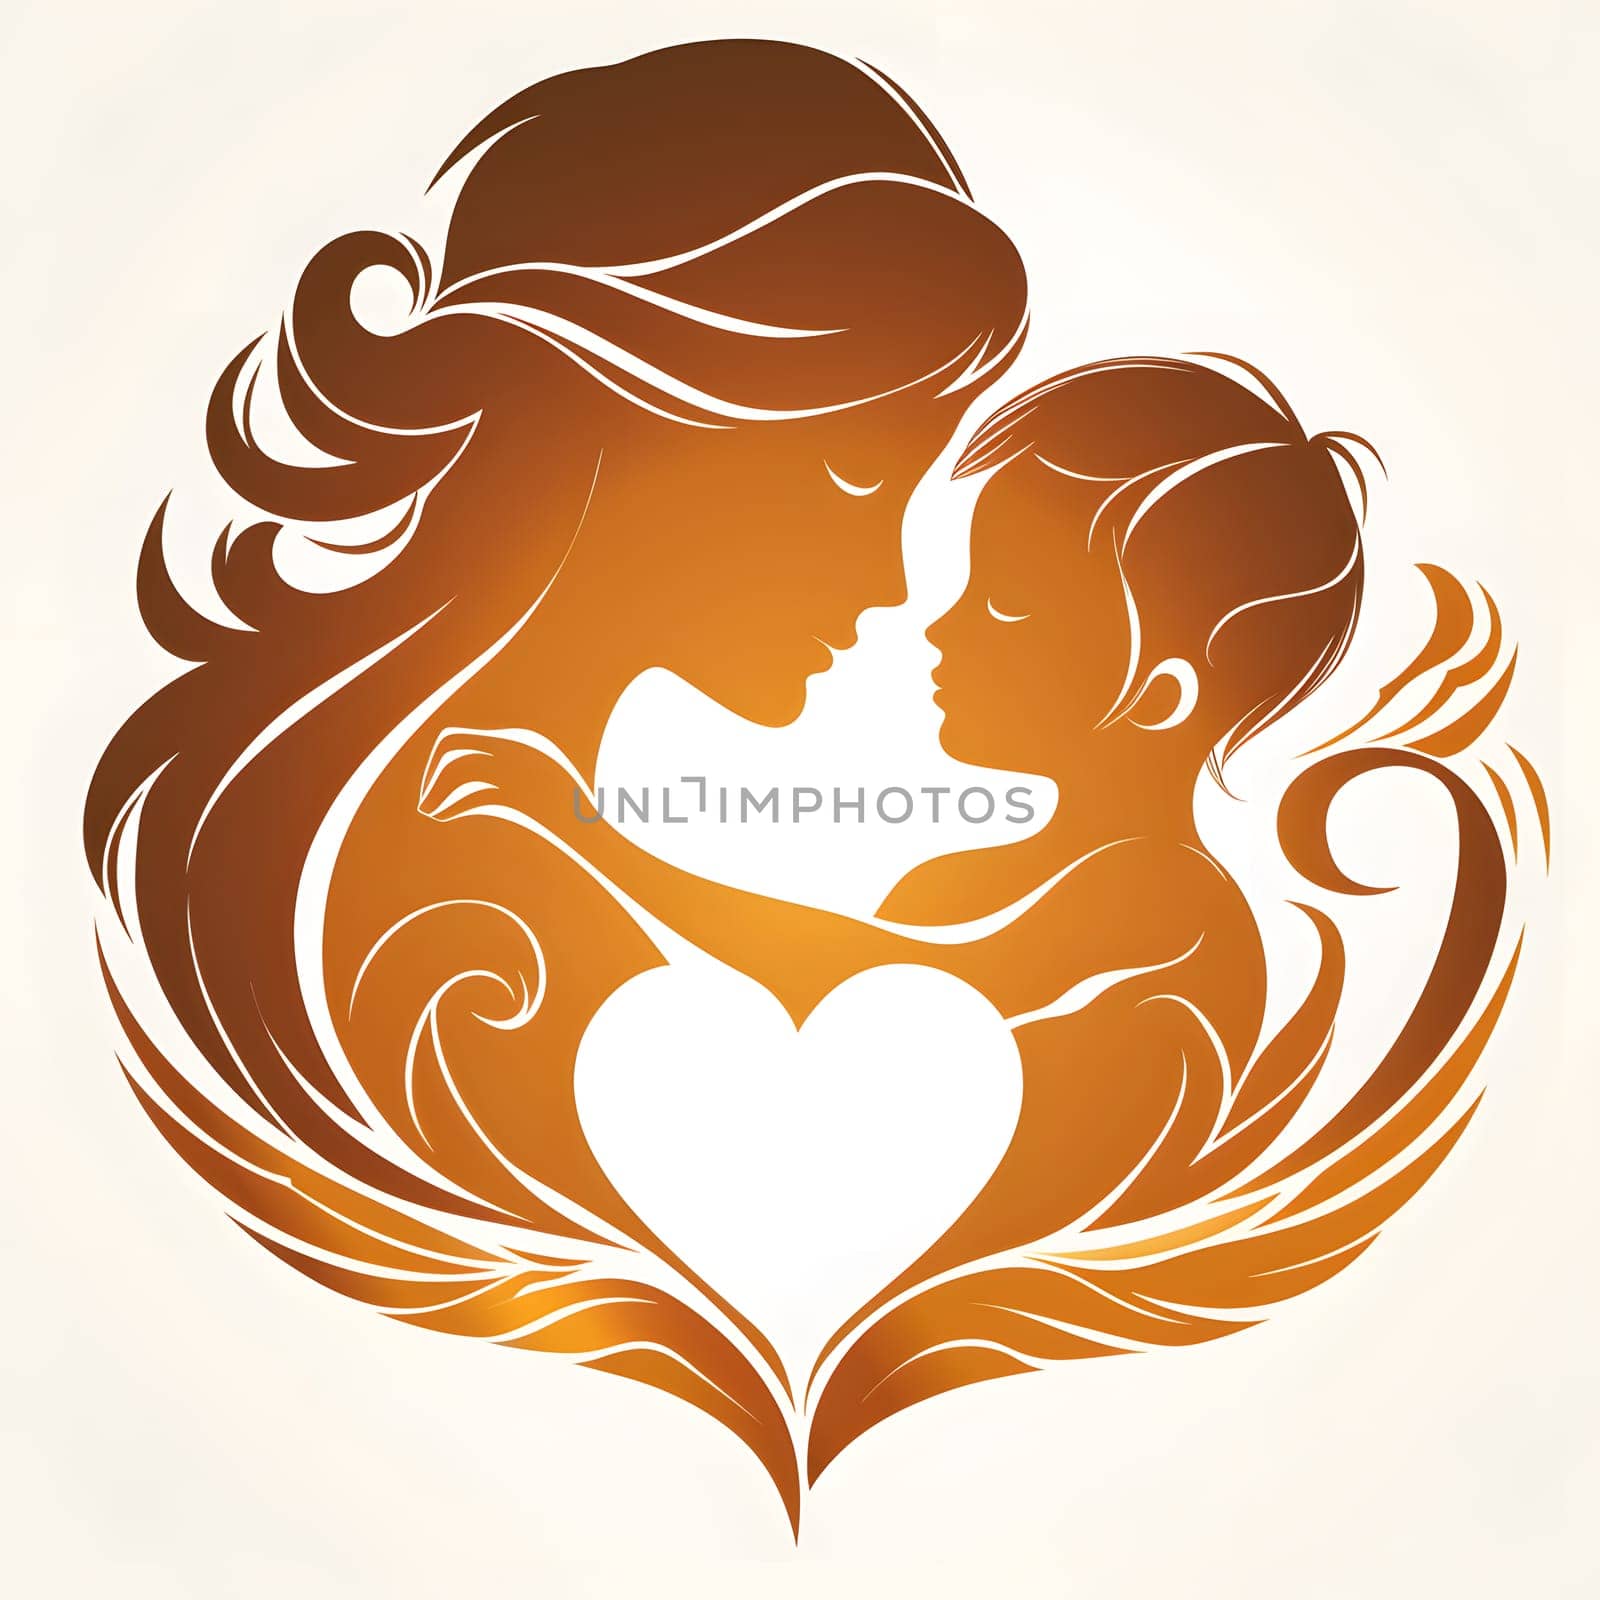 An illustration in a stylish fashion accessory pattern featuring a silhouette of a woman with flowing hair, holding a baby in her arms, with a peachcolored background